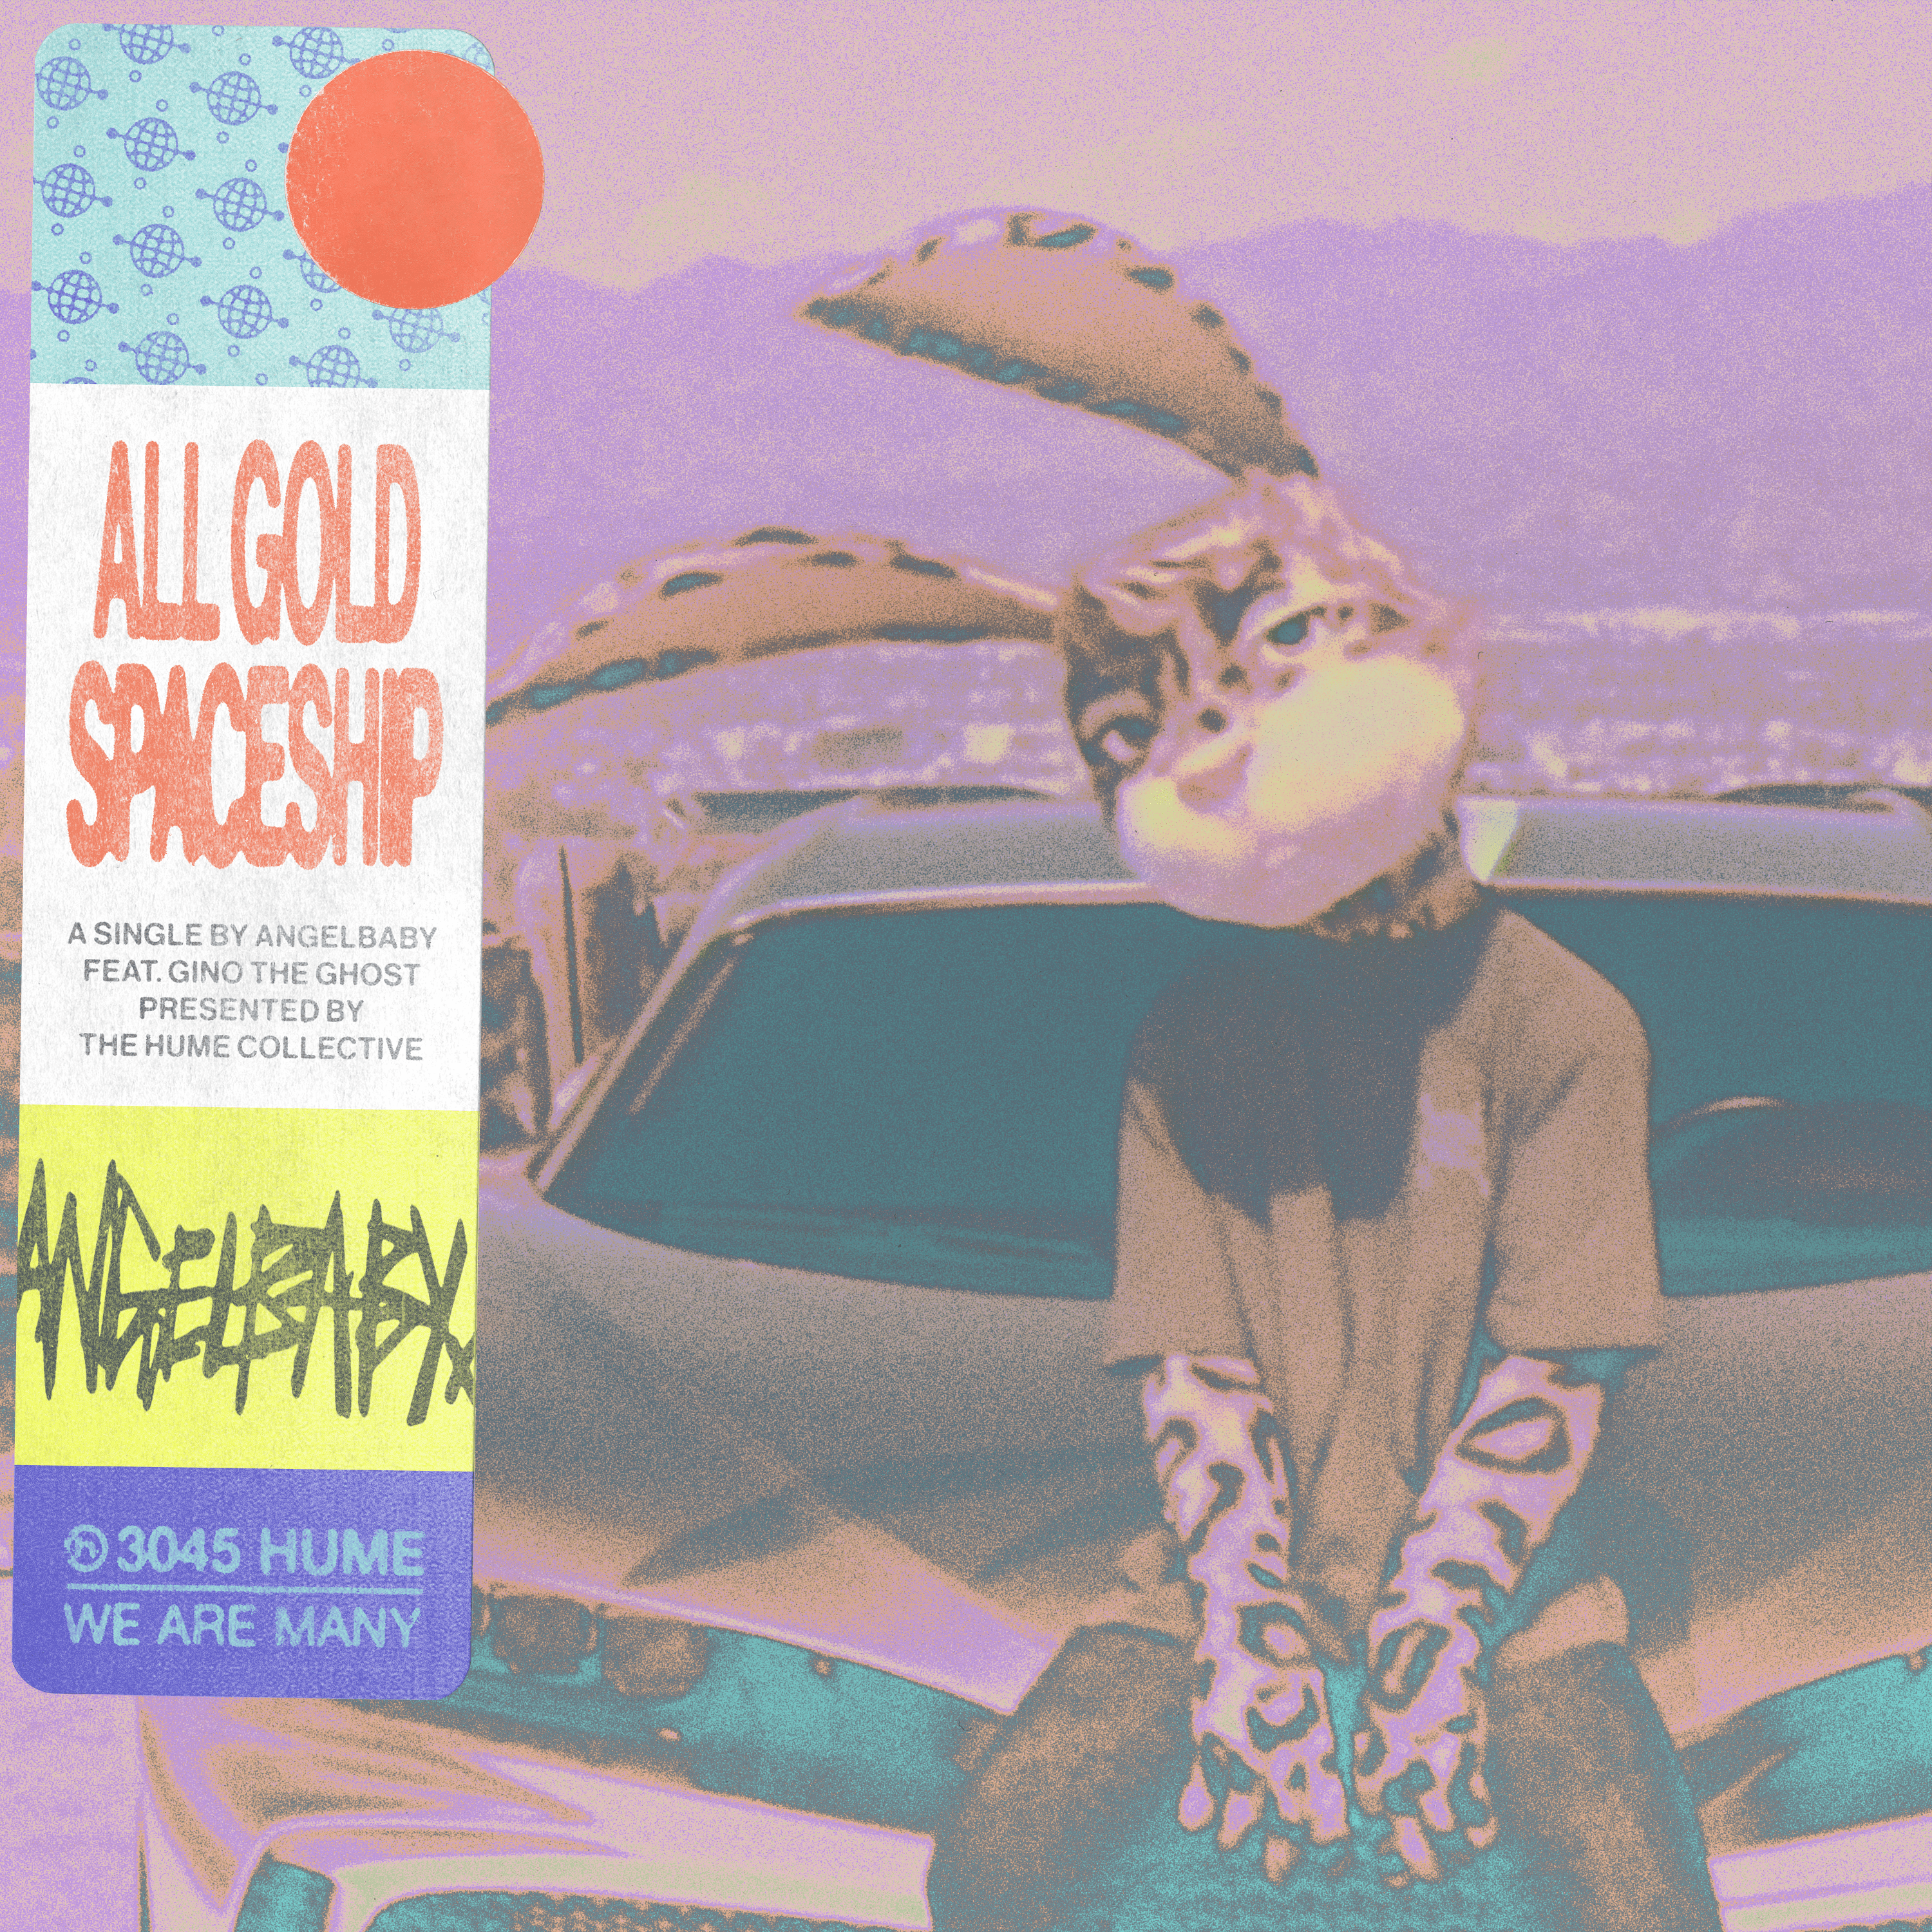 All Gold Spaceship #66